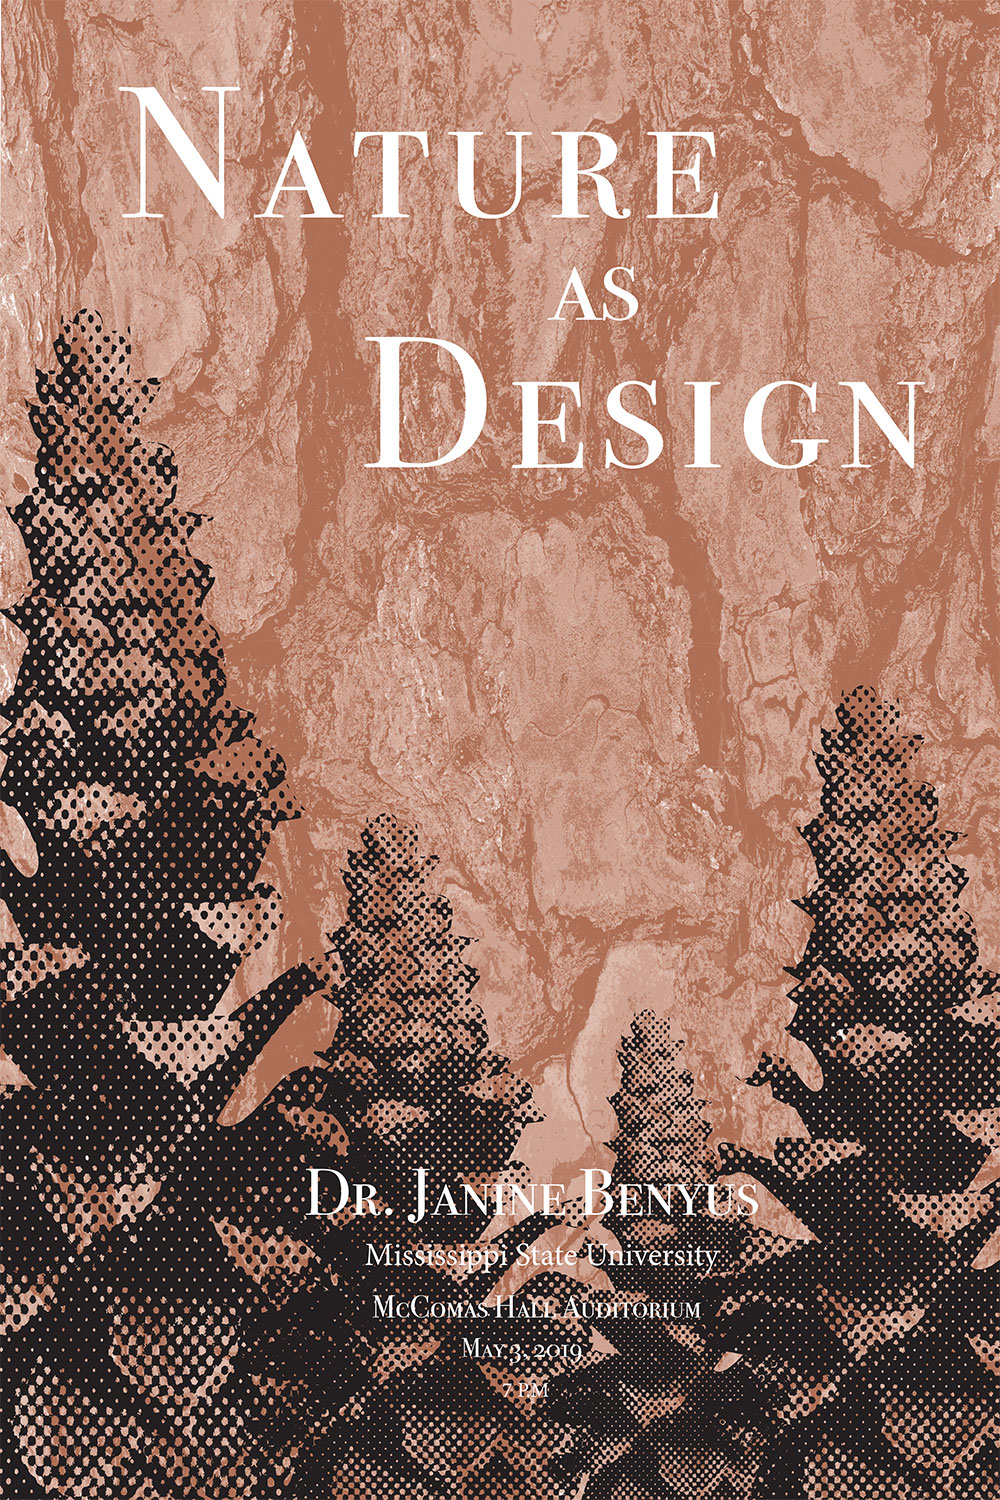 A Nature as design poster created out of a bitmapped black pinecones and a light brownish colored rock.